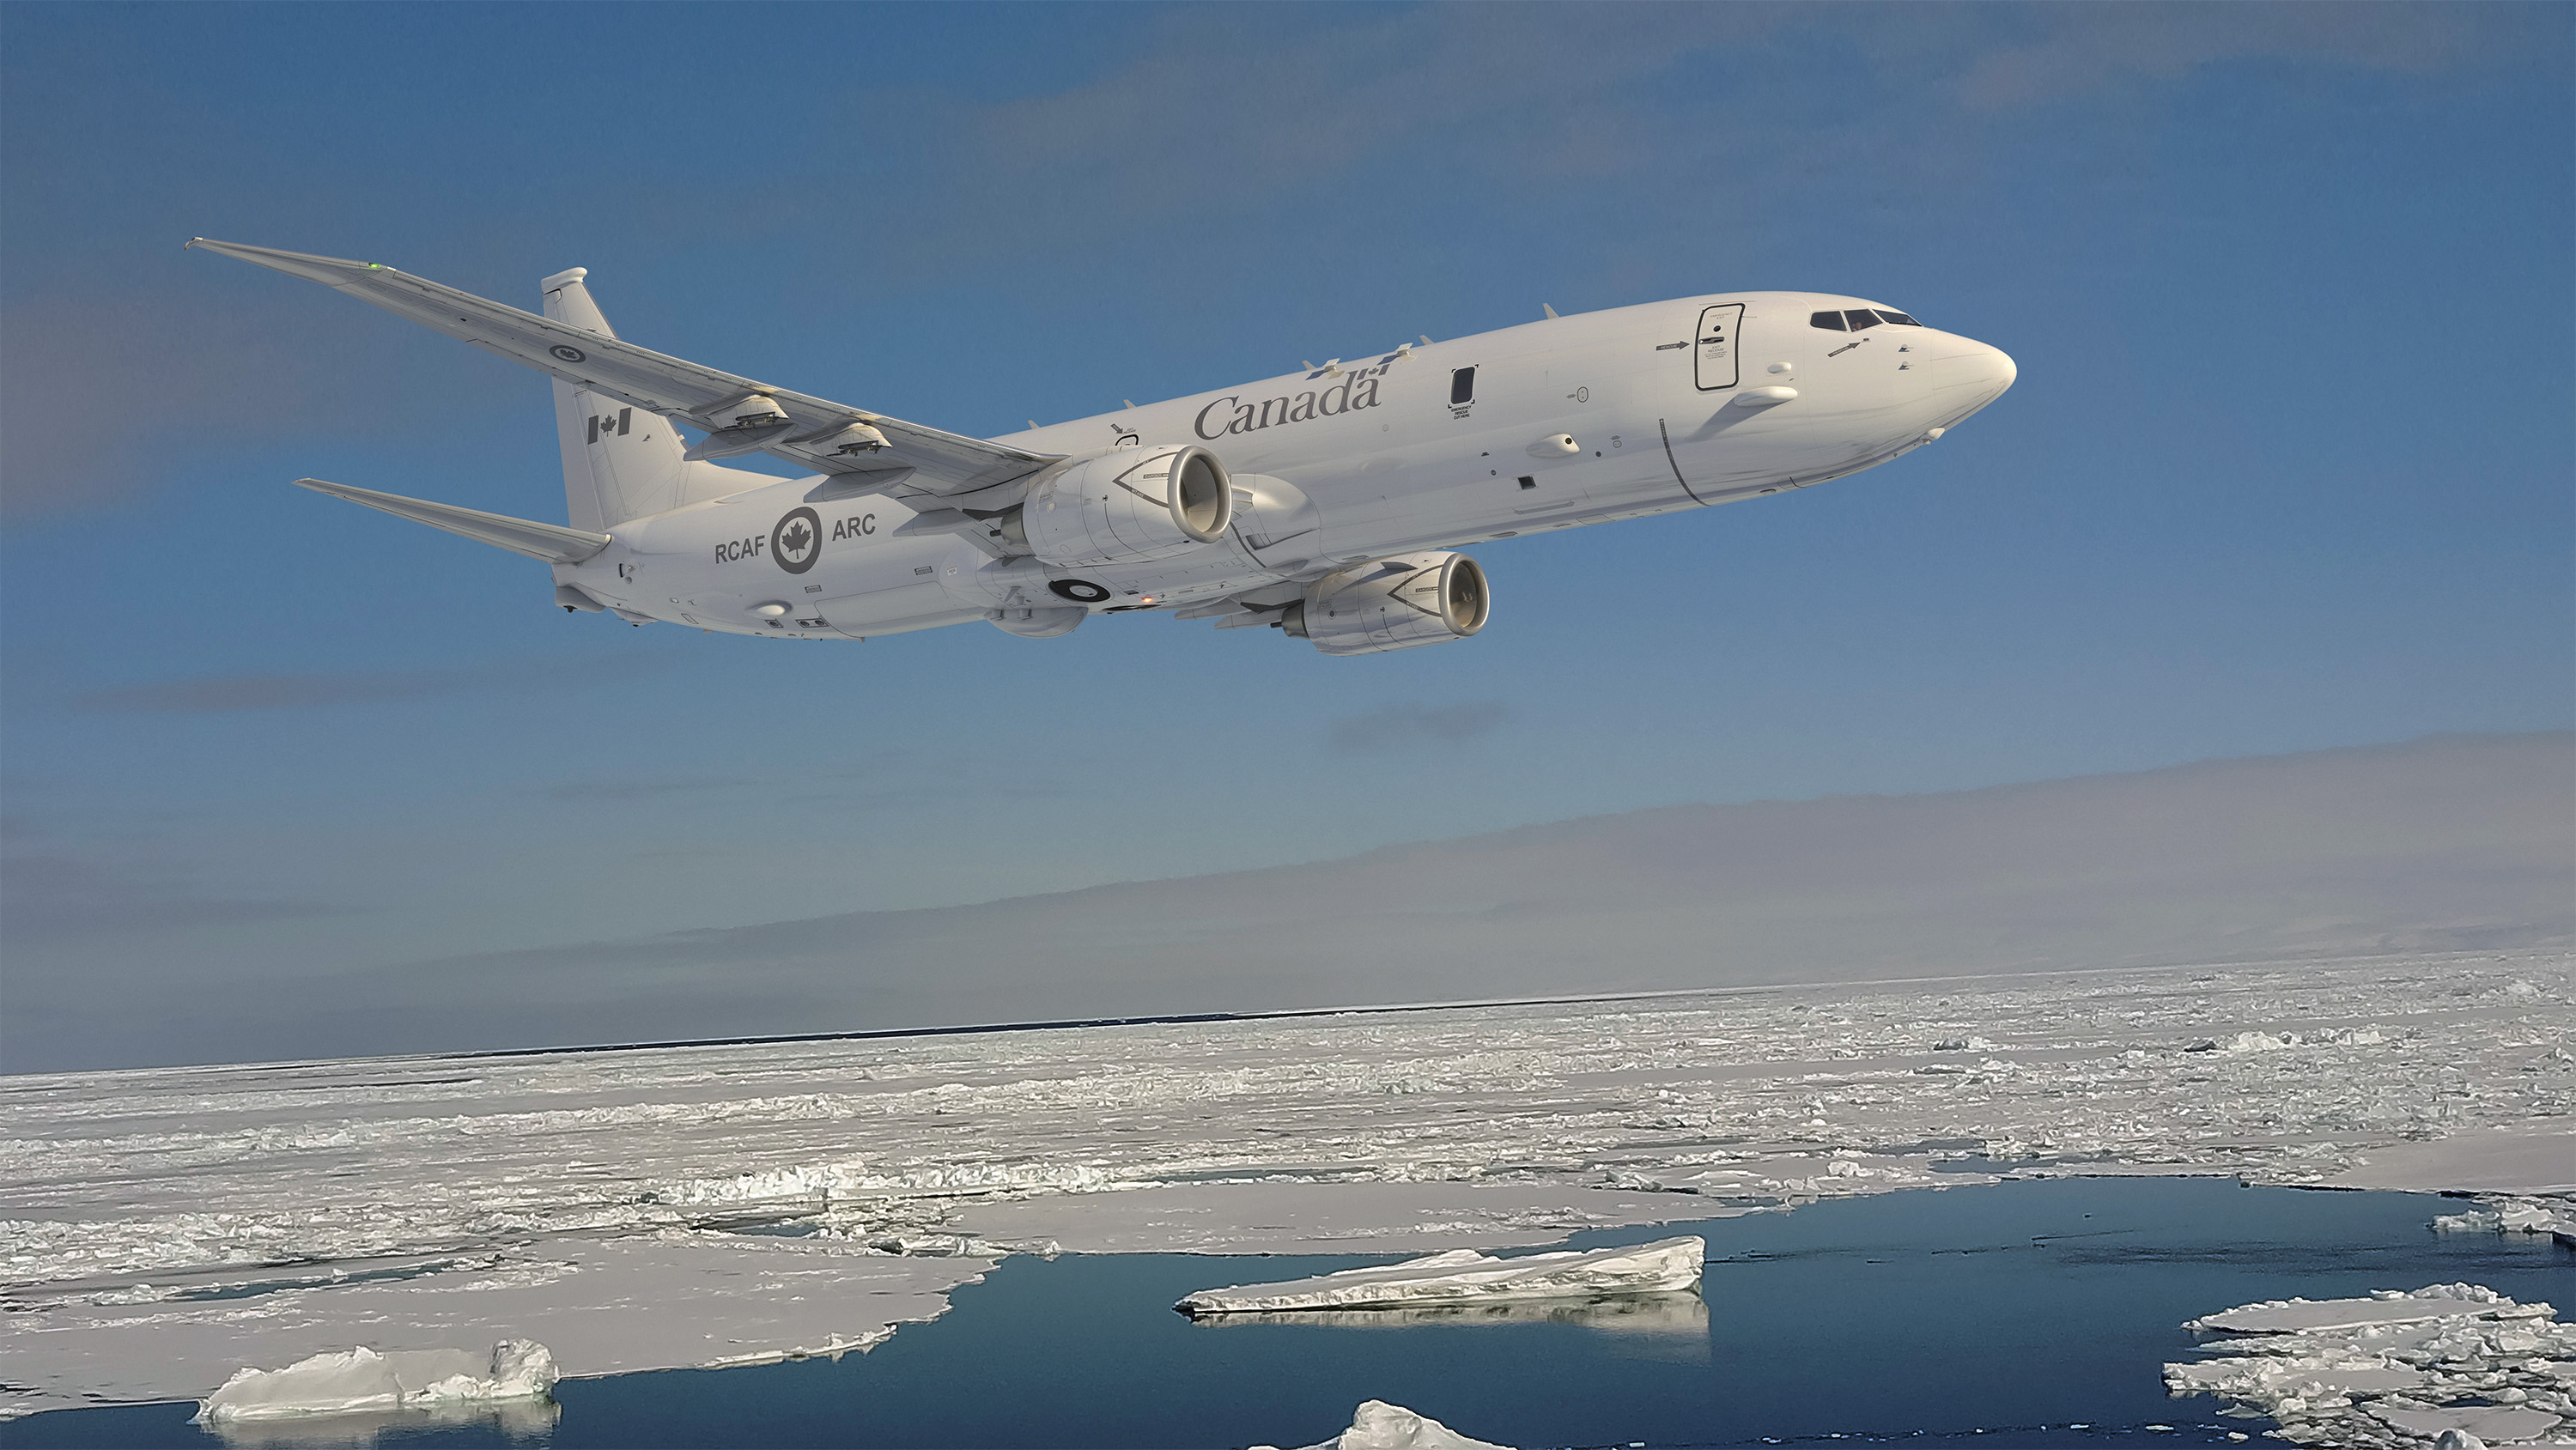 Canada has submitted a Letter of Request (LOR) for P-8A Poseidon Fleet through the United States  Foreign Military Sales (FMS) program.